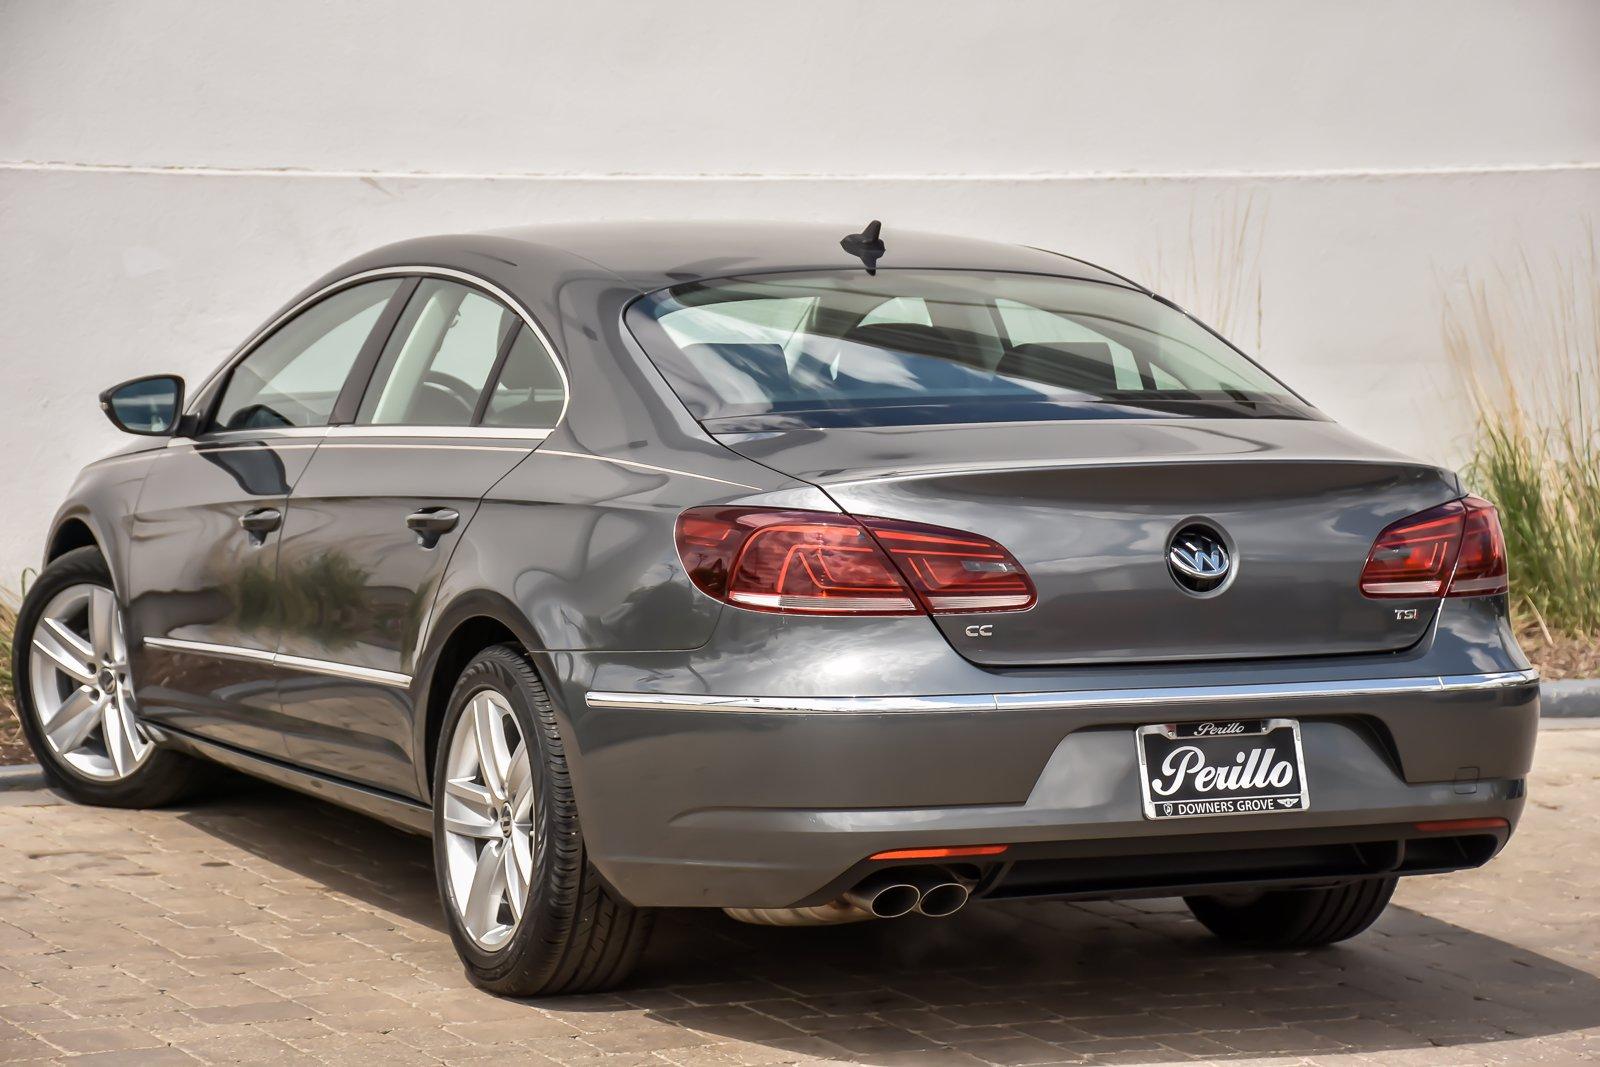 Used 2016 Volkswagen CC Sport | Downers Grove, IL